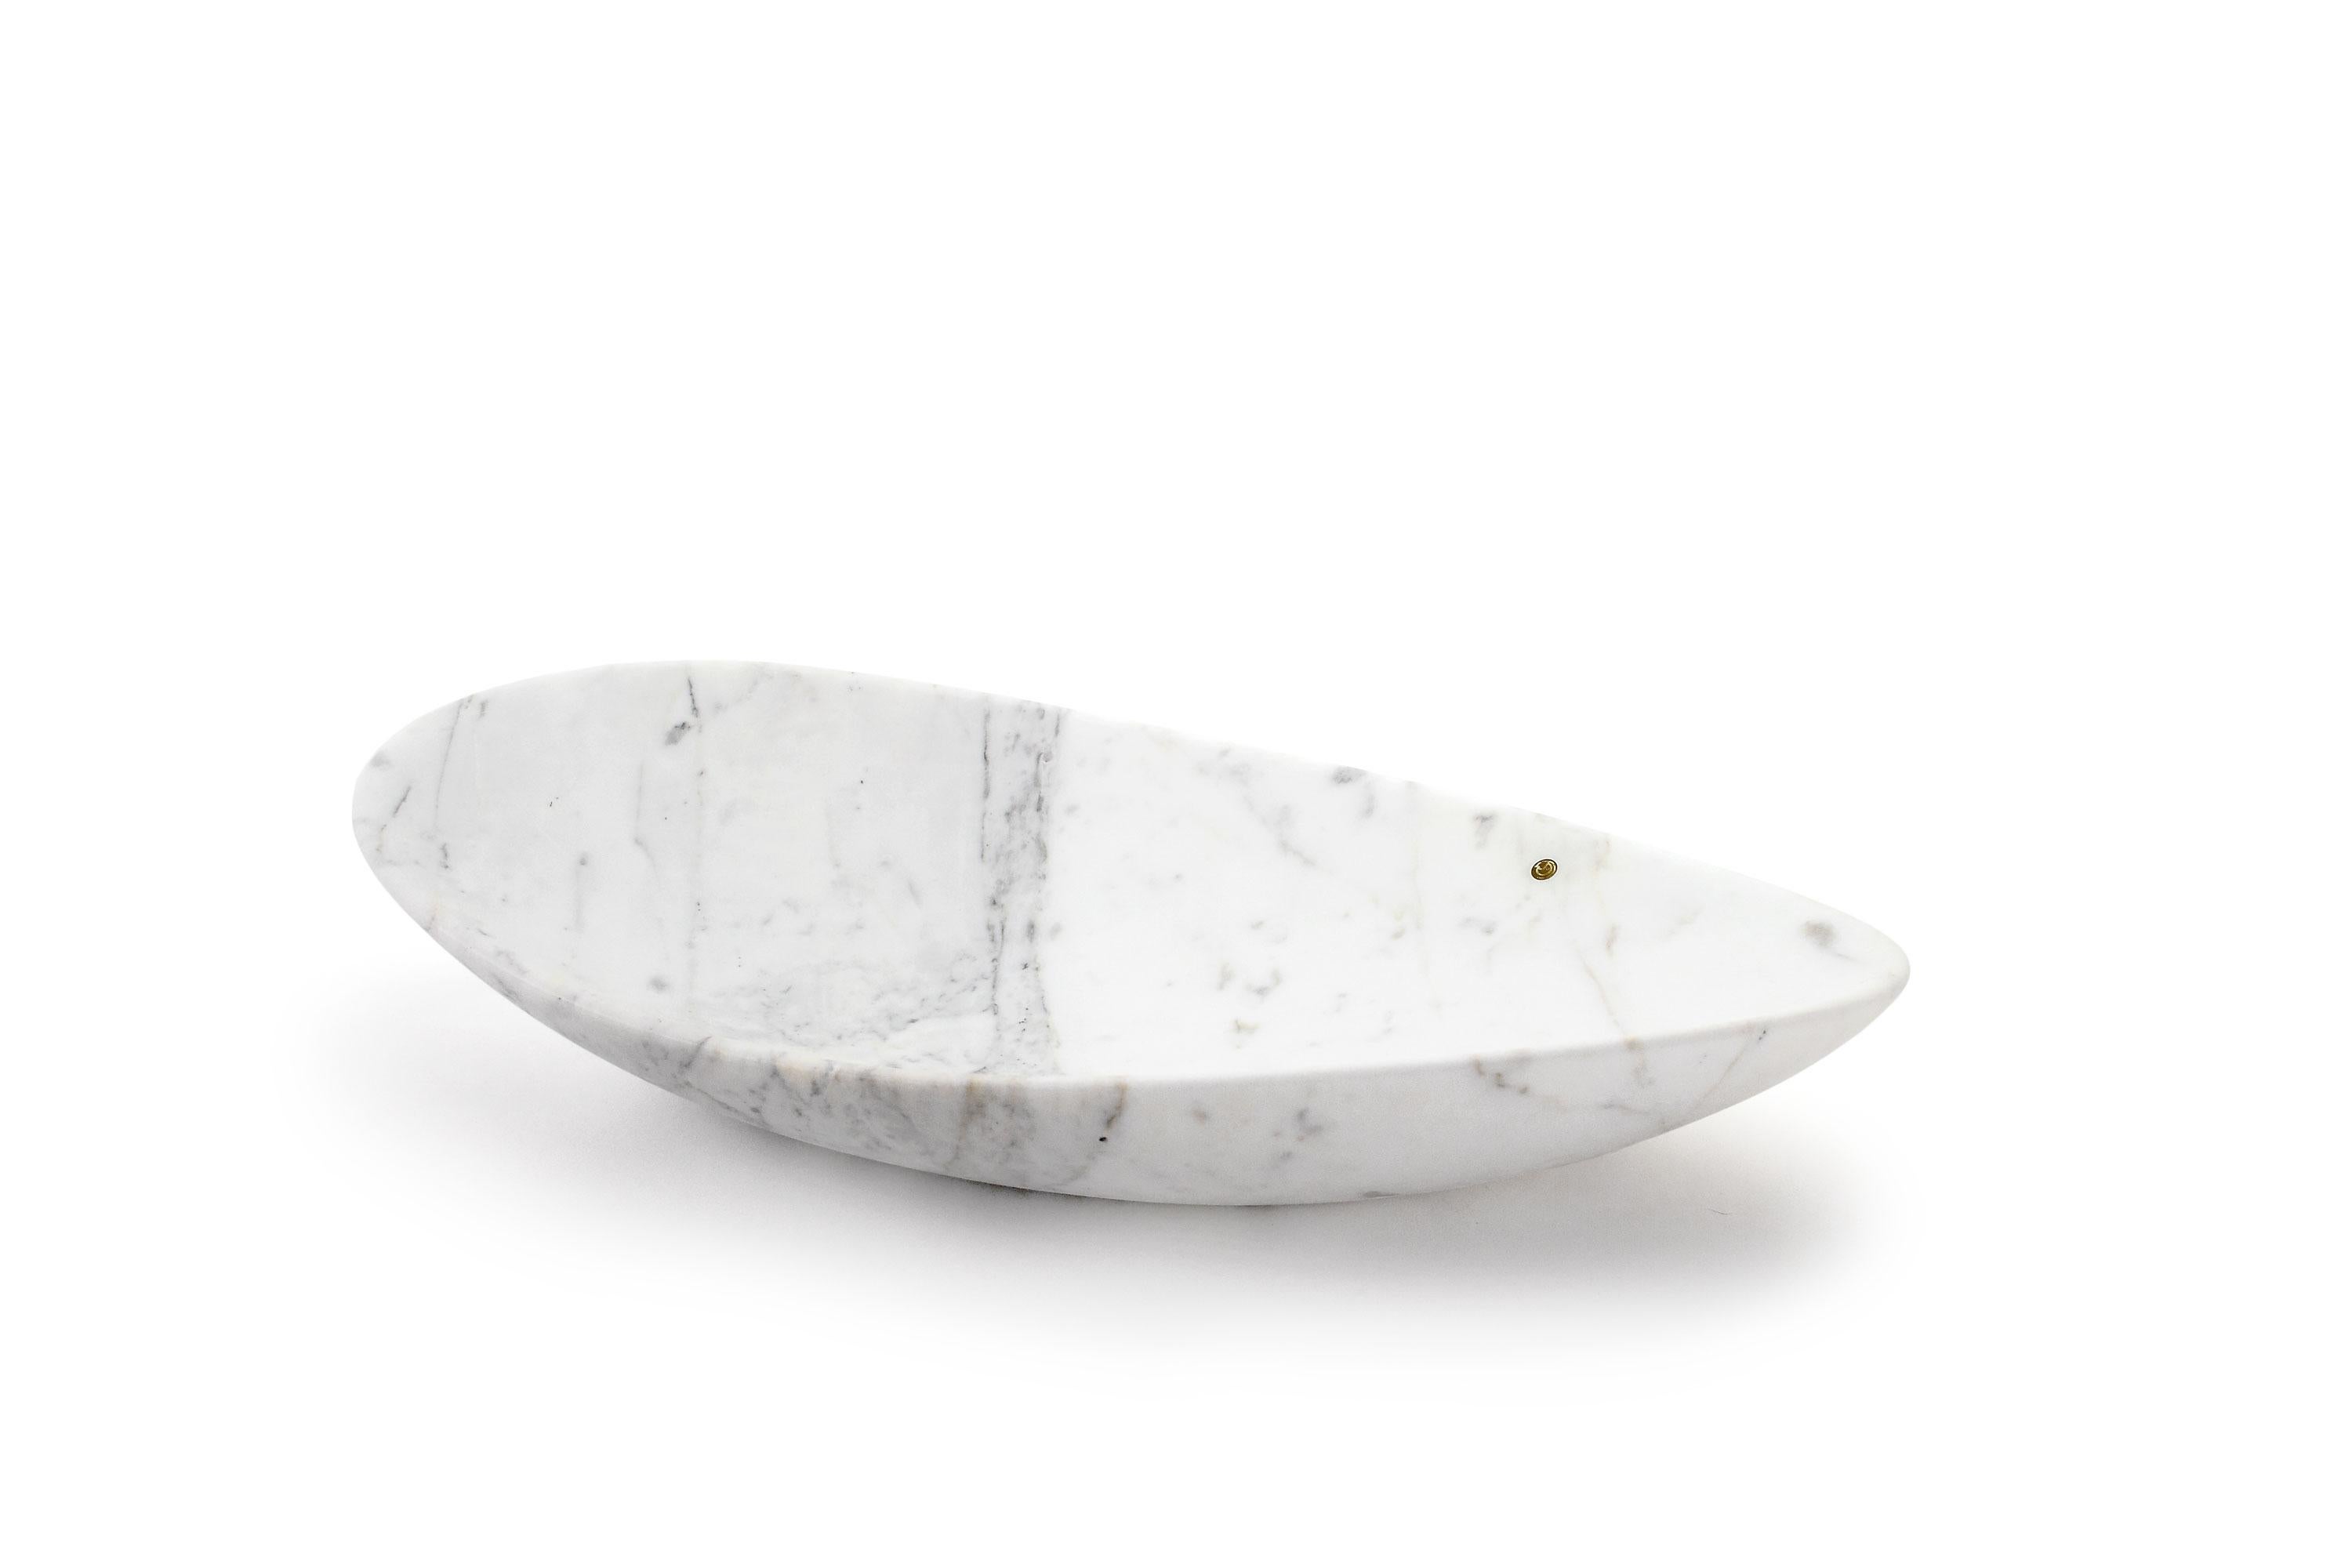 Bowl sculpted by hand from a solid block of Calacatta marble. Velvet finishing. 

Dimensions: Medium L 45 x W 22 x H 10 cm. 
Also available: Small L 35, W 17, H 8 cm. and Big L 56, W 27, H 12 cm.
Available in different marbles, onyx and quartzite.